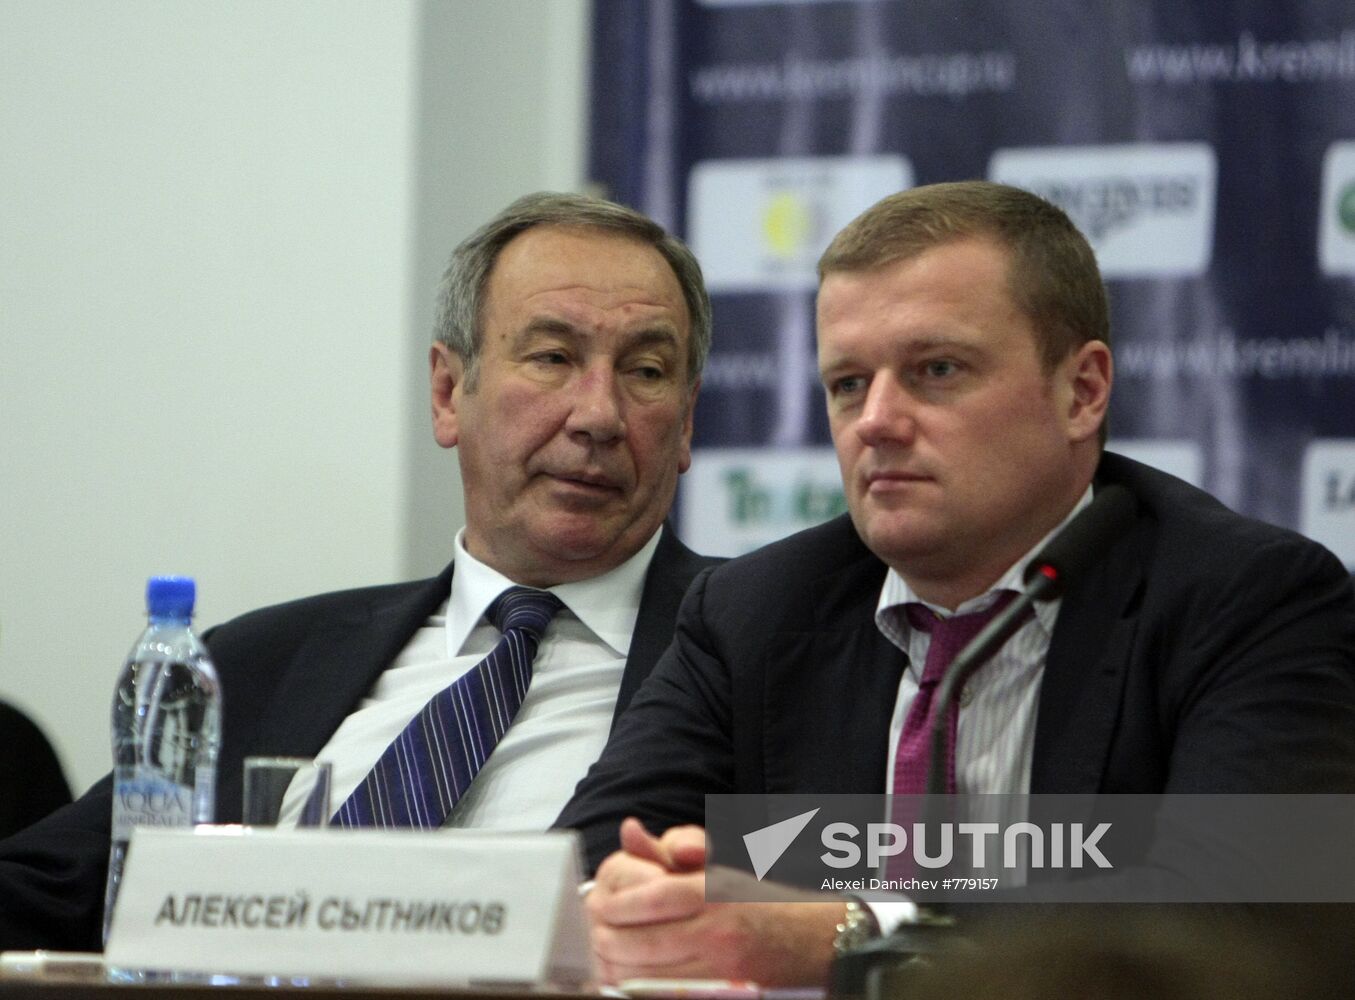 News confrence on forthcoming tennis events in Moscow